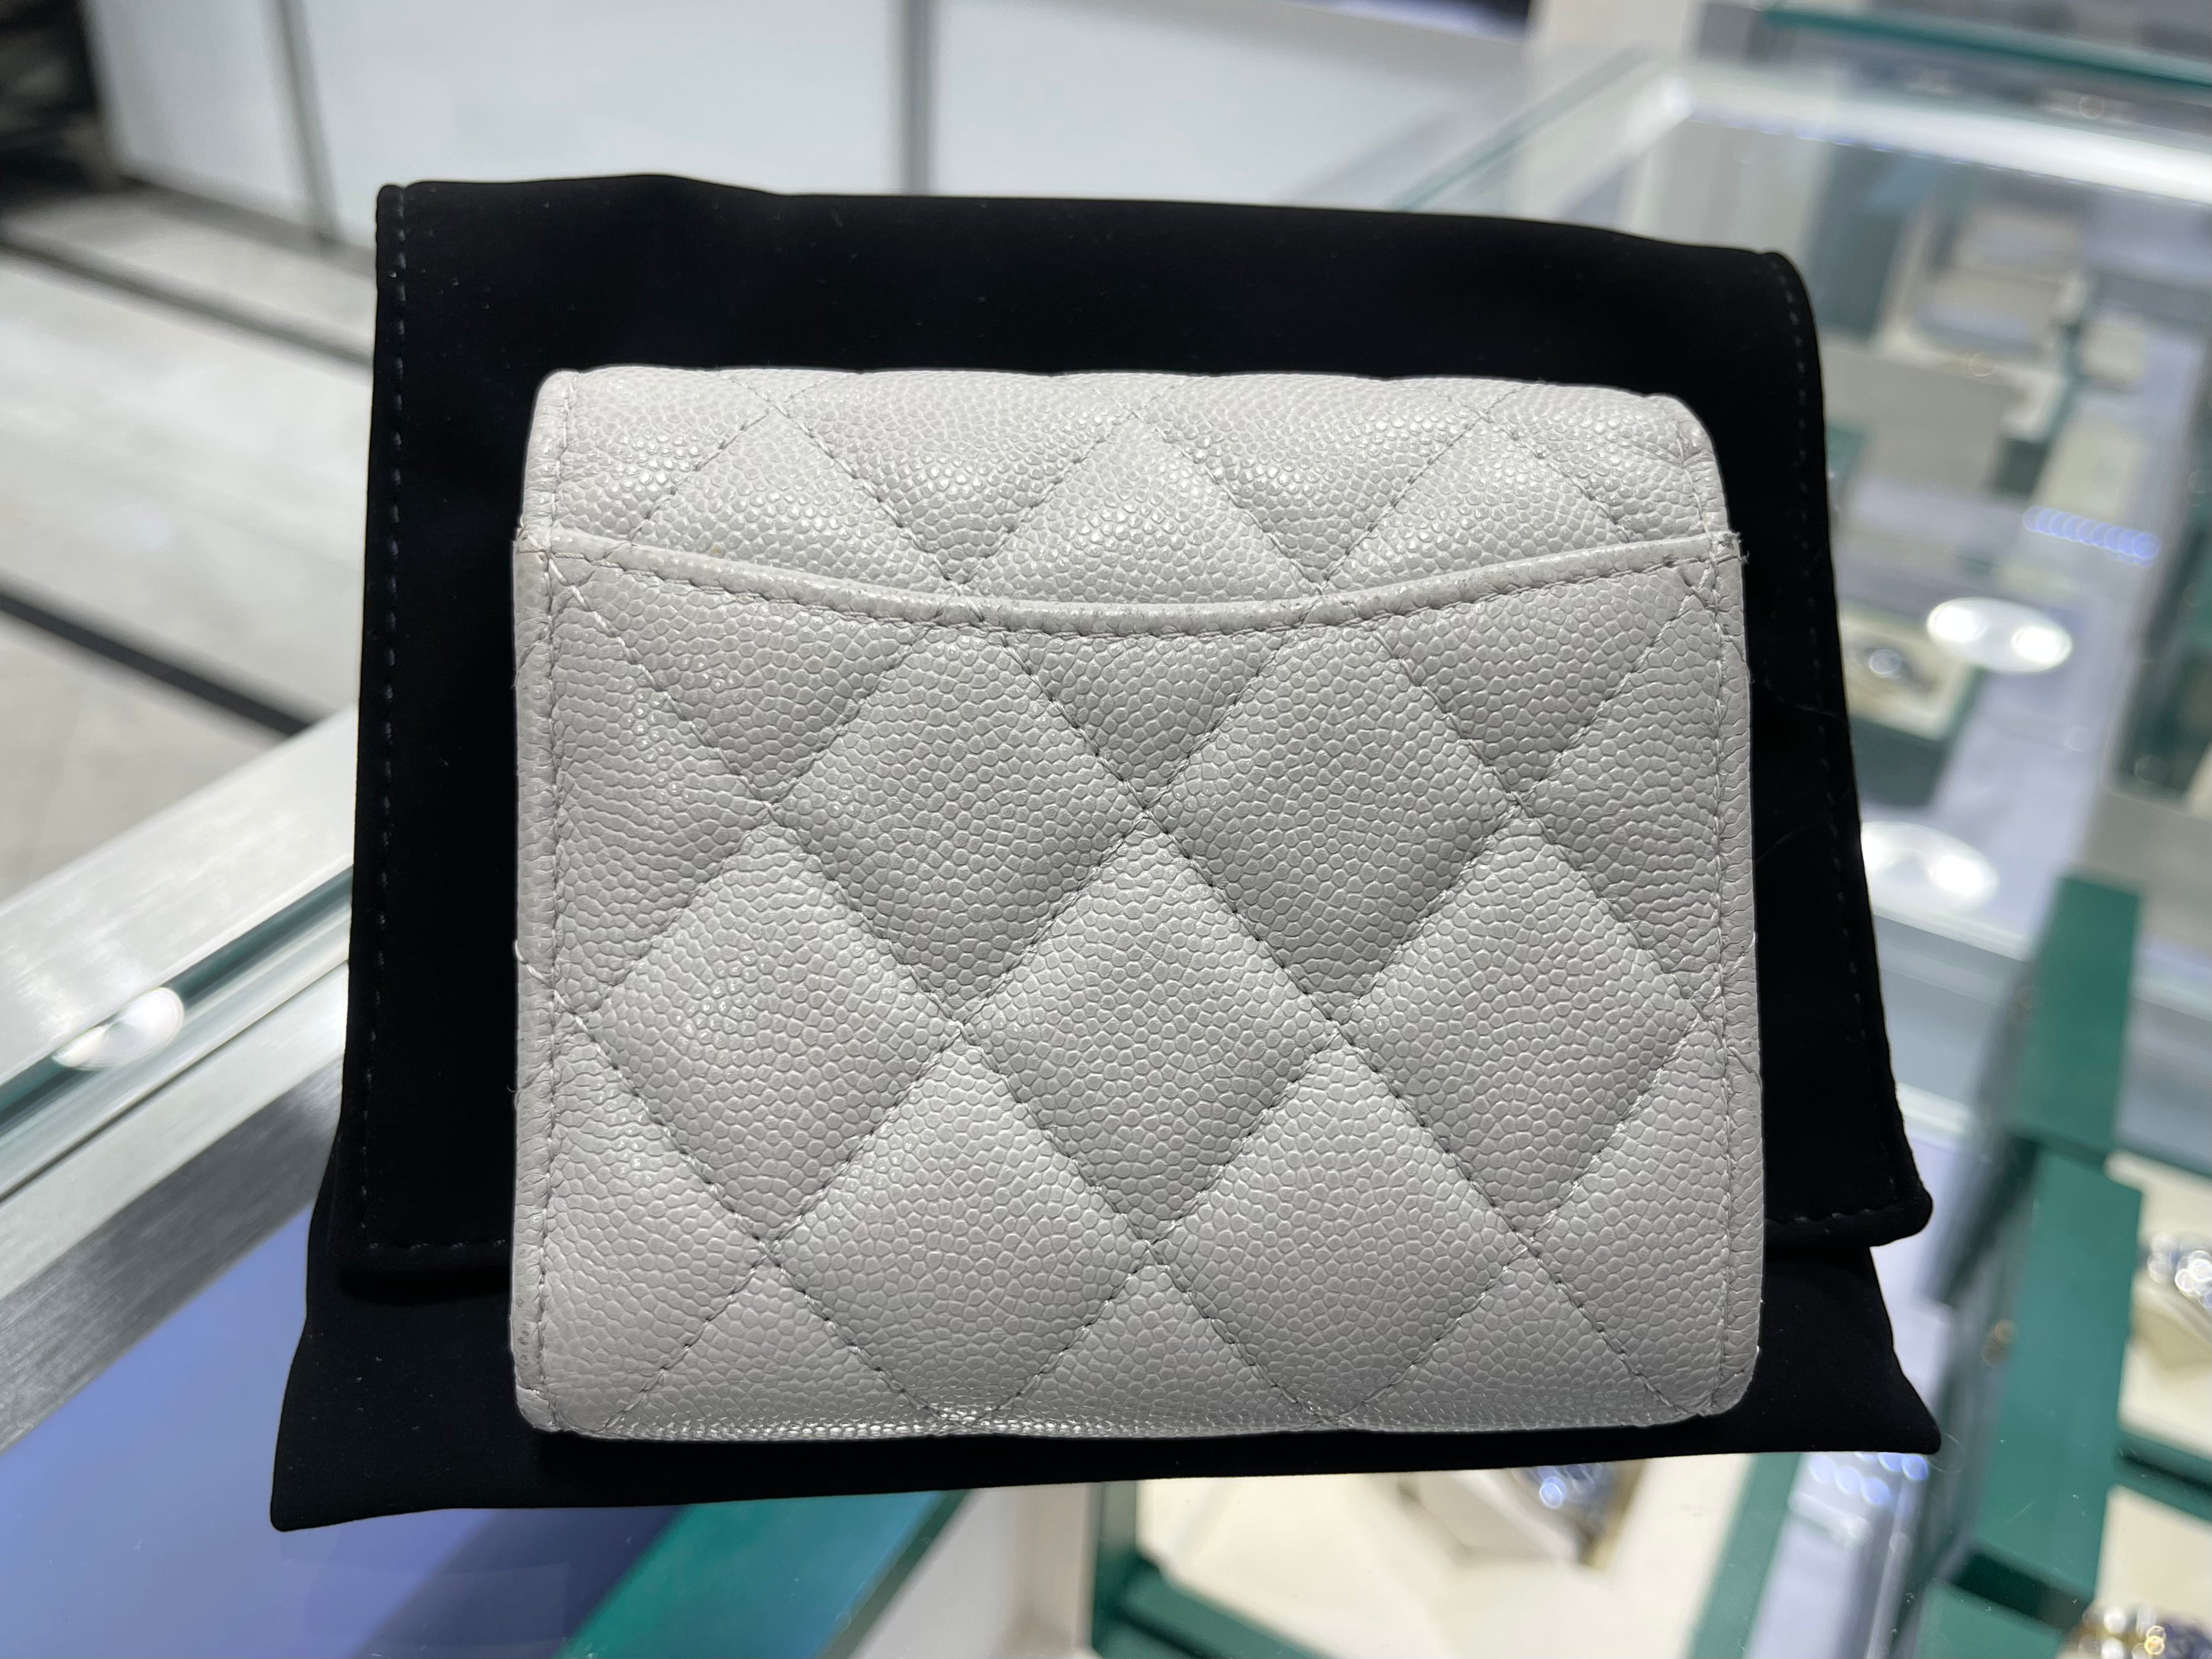 Chanel Wallet Prices